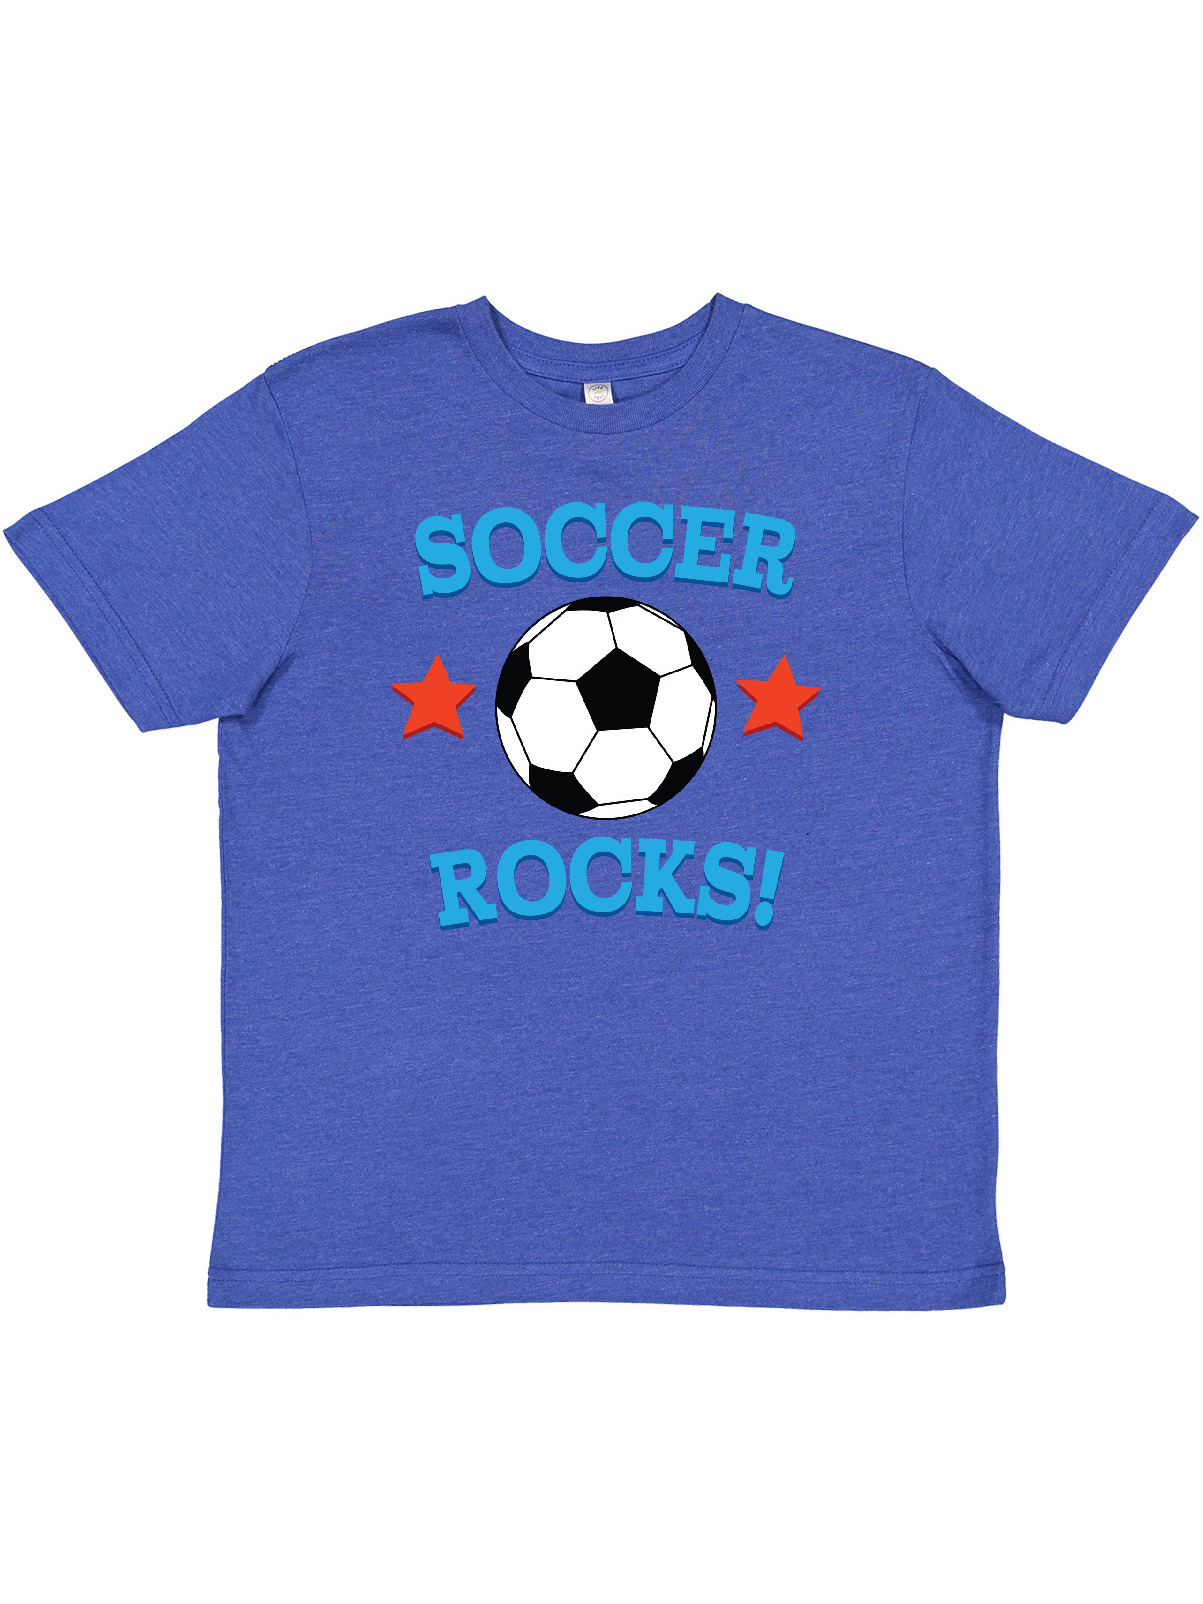 Inktastic Soccer Rocks Coach Player Youth T-Shirt - image 1 of 4